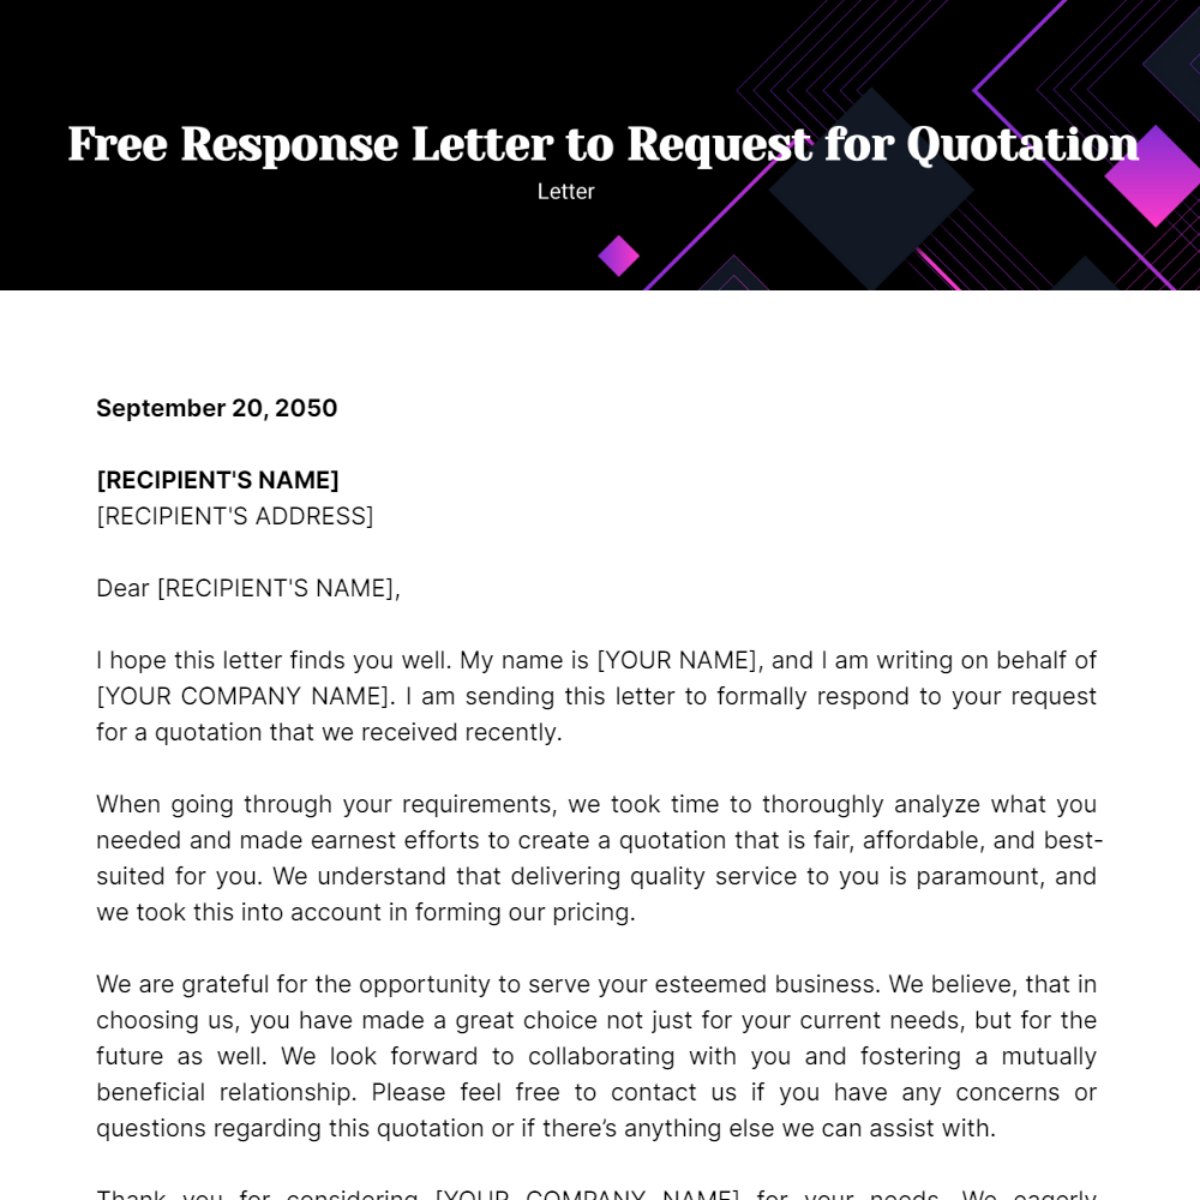 Free Response Letter to Request for Quotation